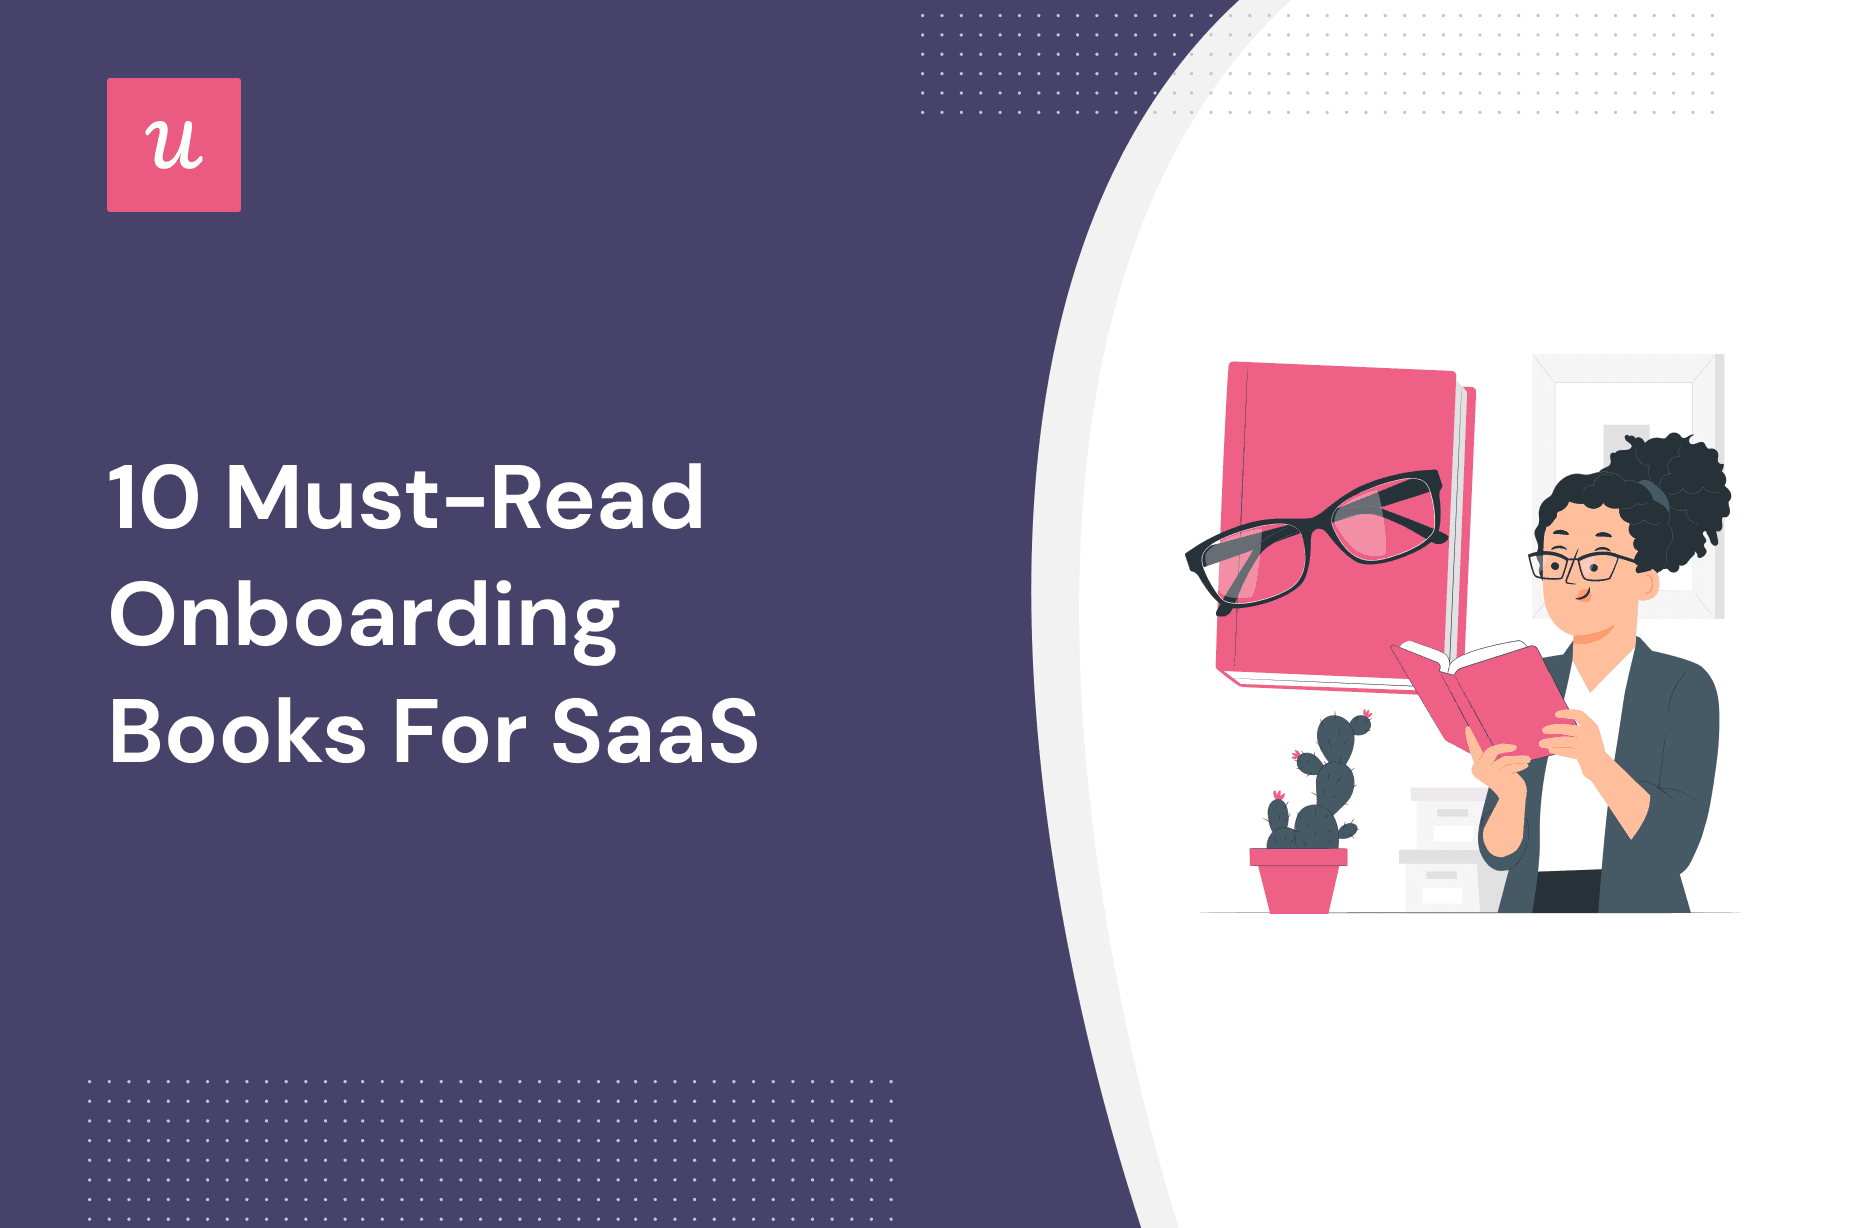 10 Must-Read Onboarding Books for SaaS cover